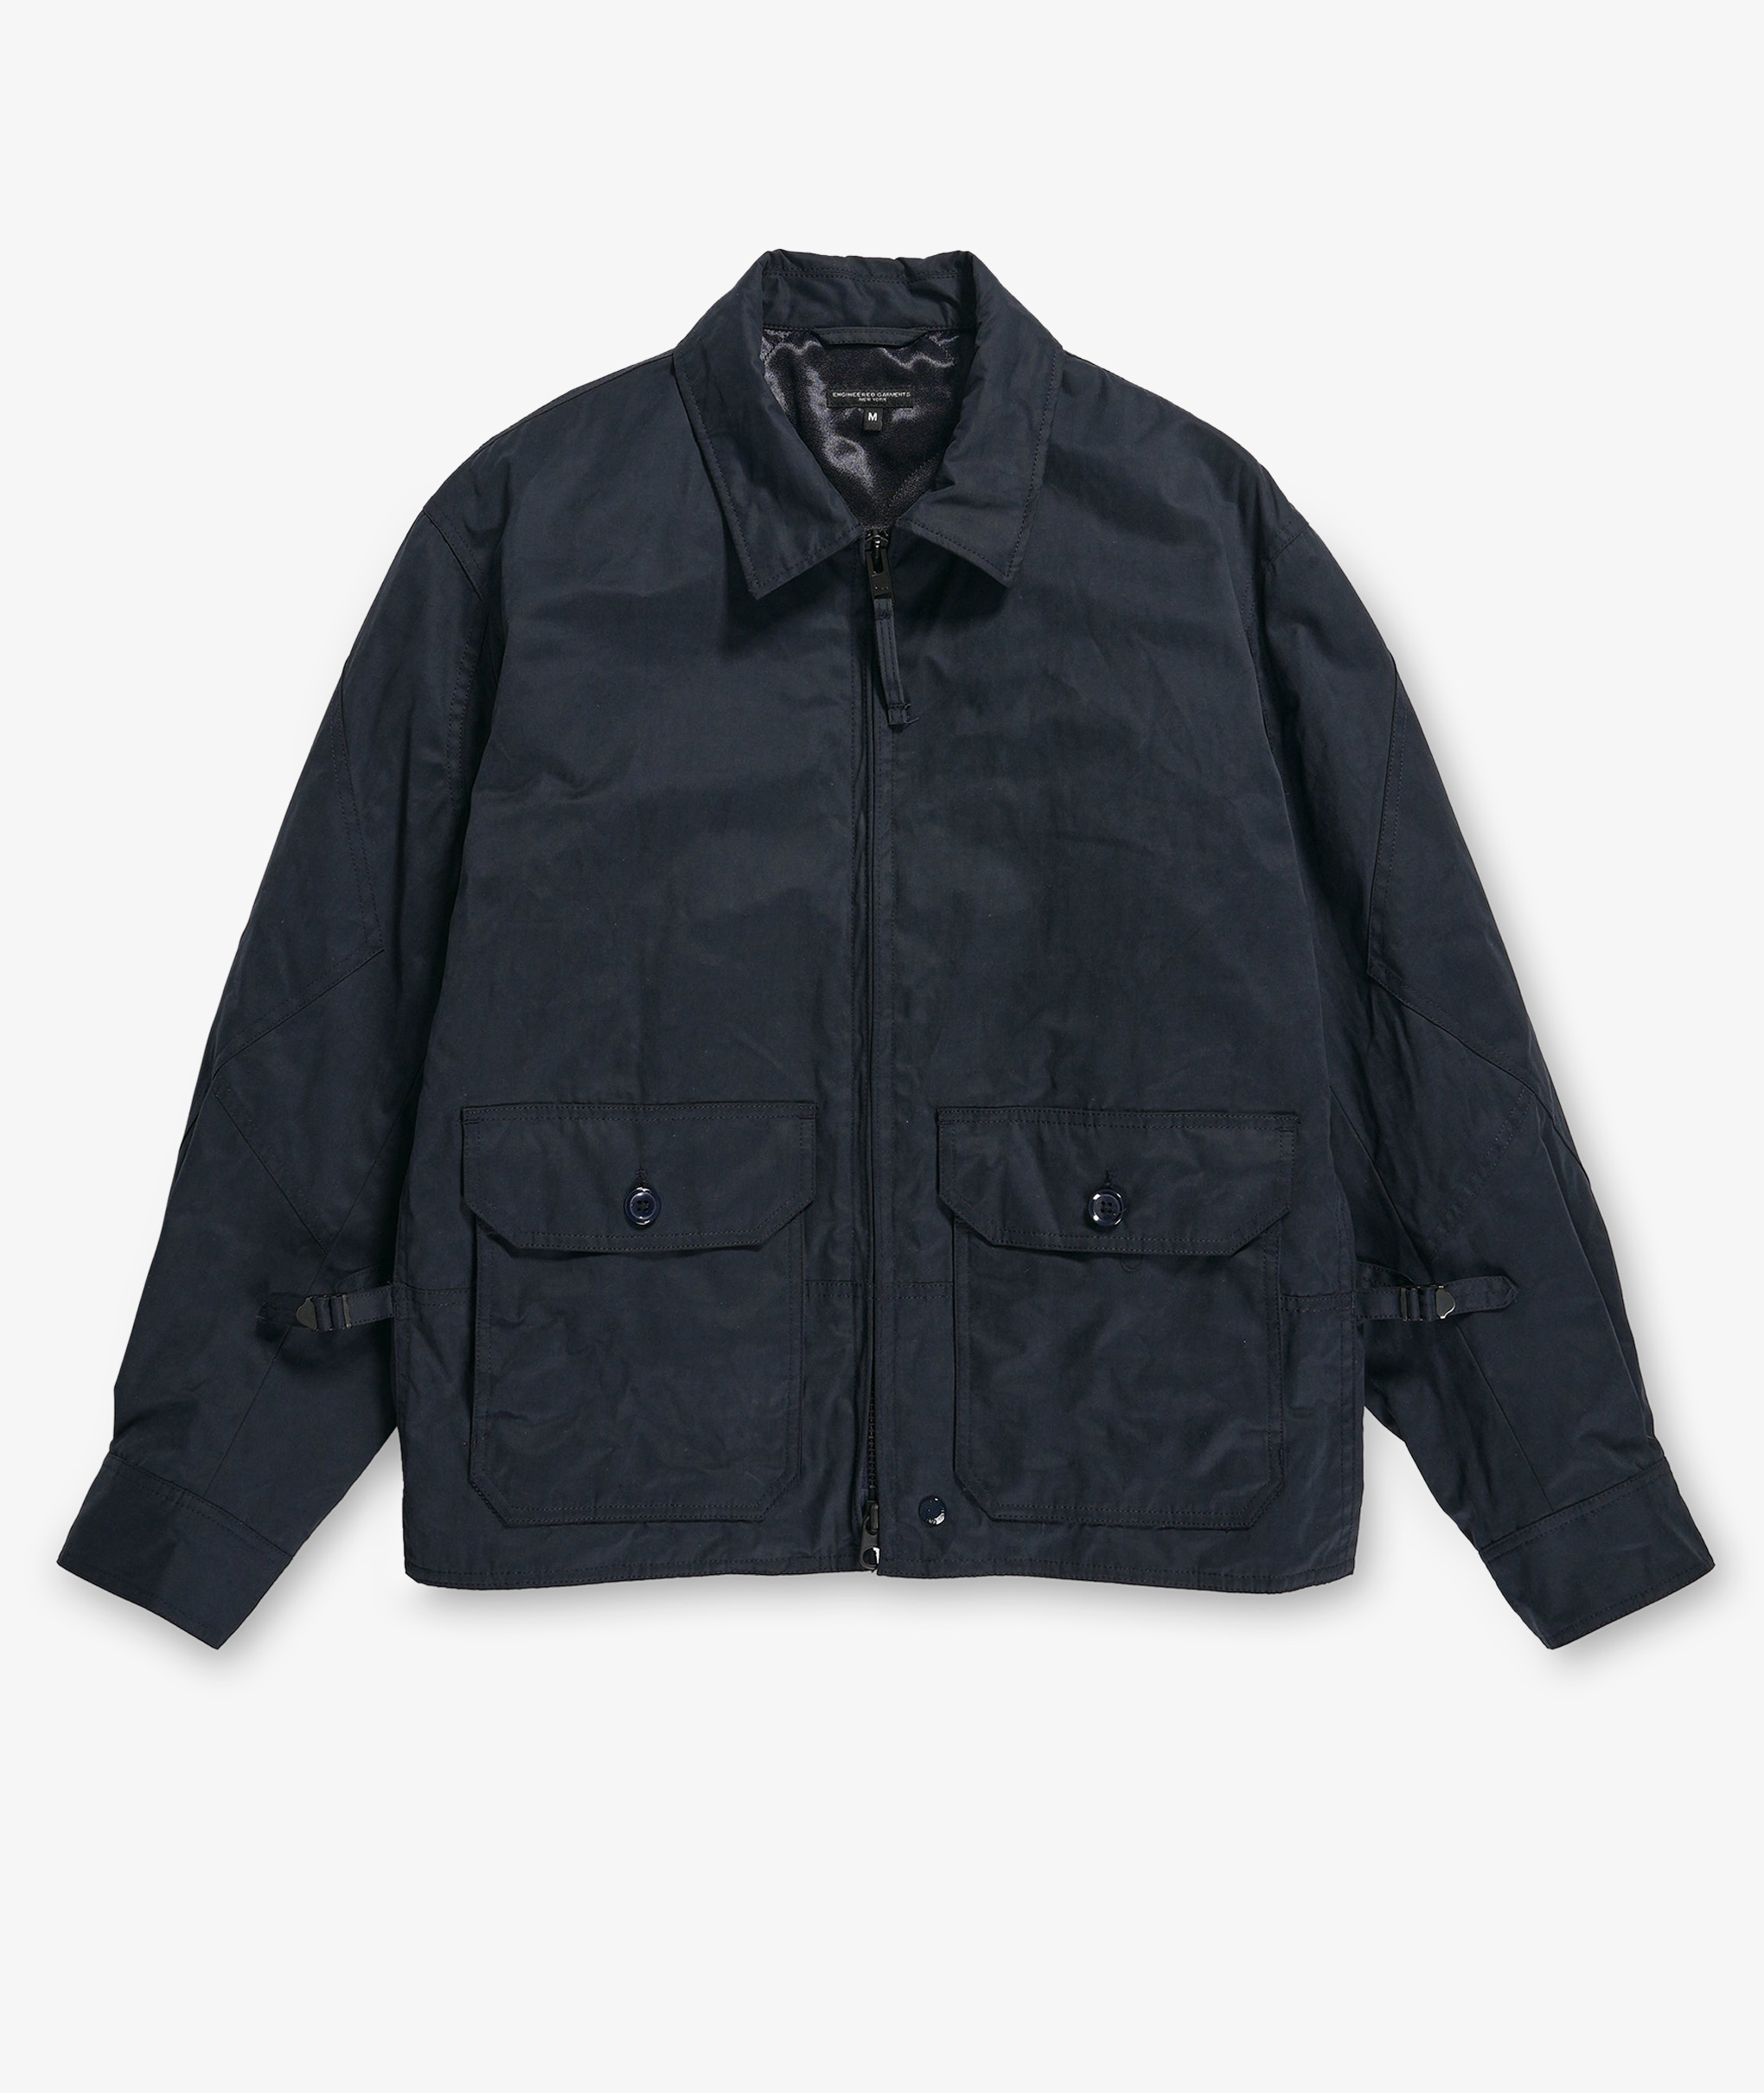 Norse Store | Shipping Worldwide - Engineered Garments G8 Jacket